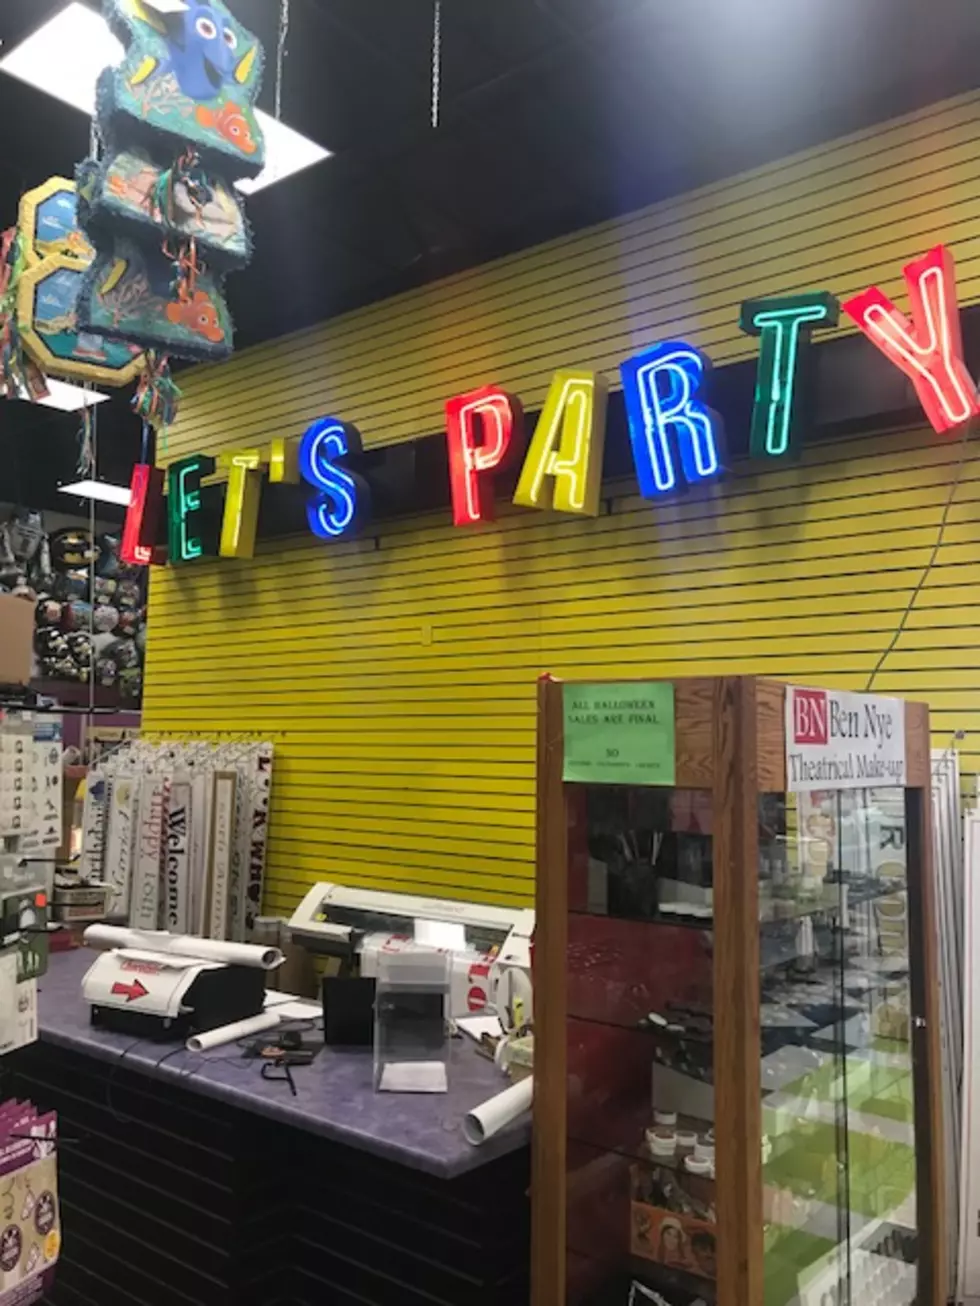 “Lets Party” in Kennewick is Doing Something Different